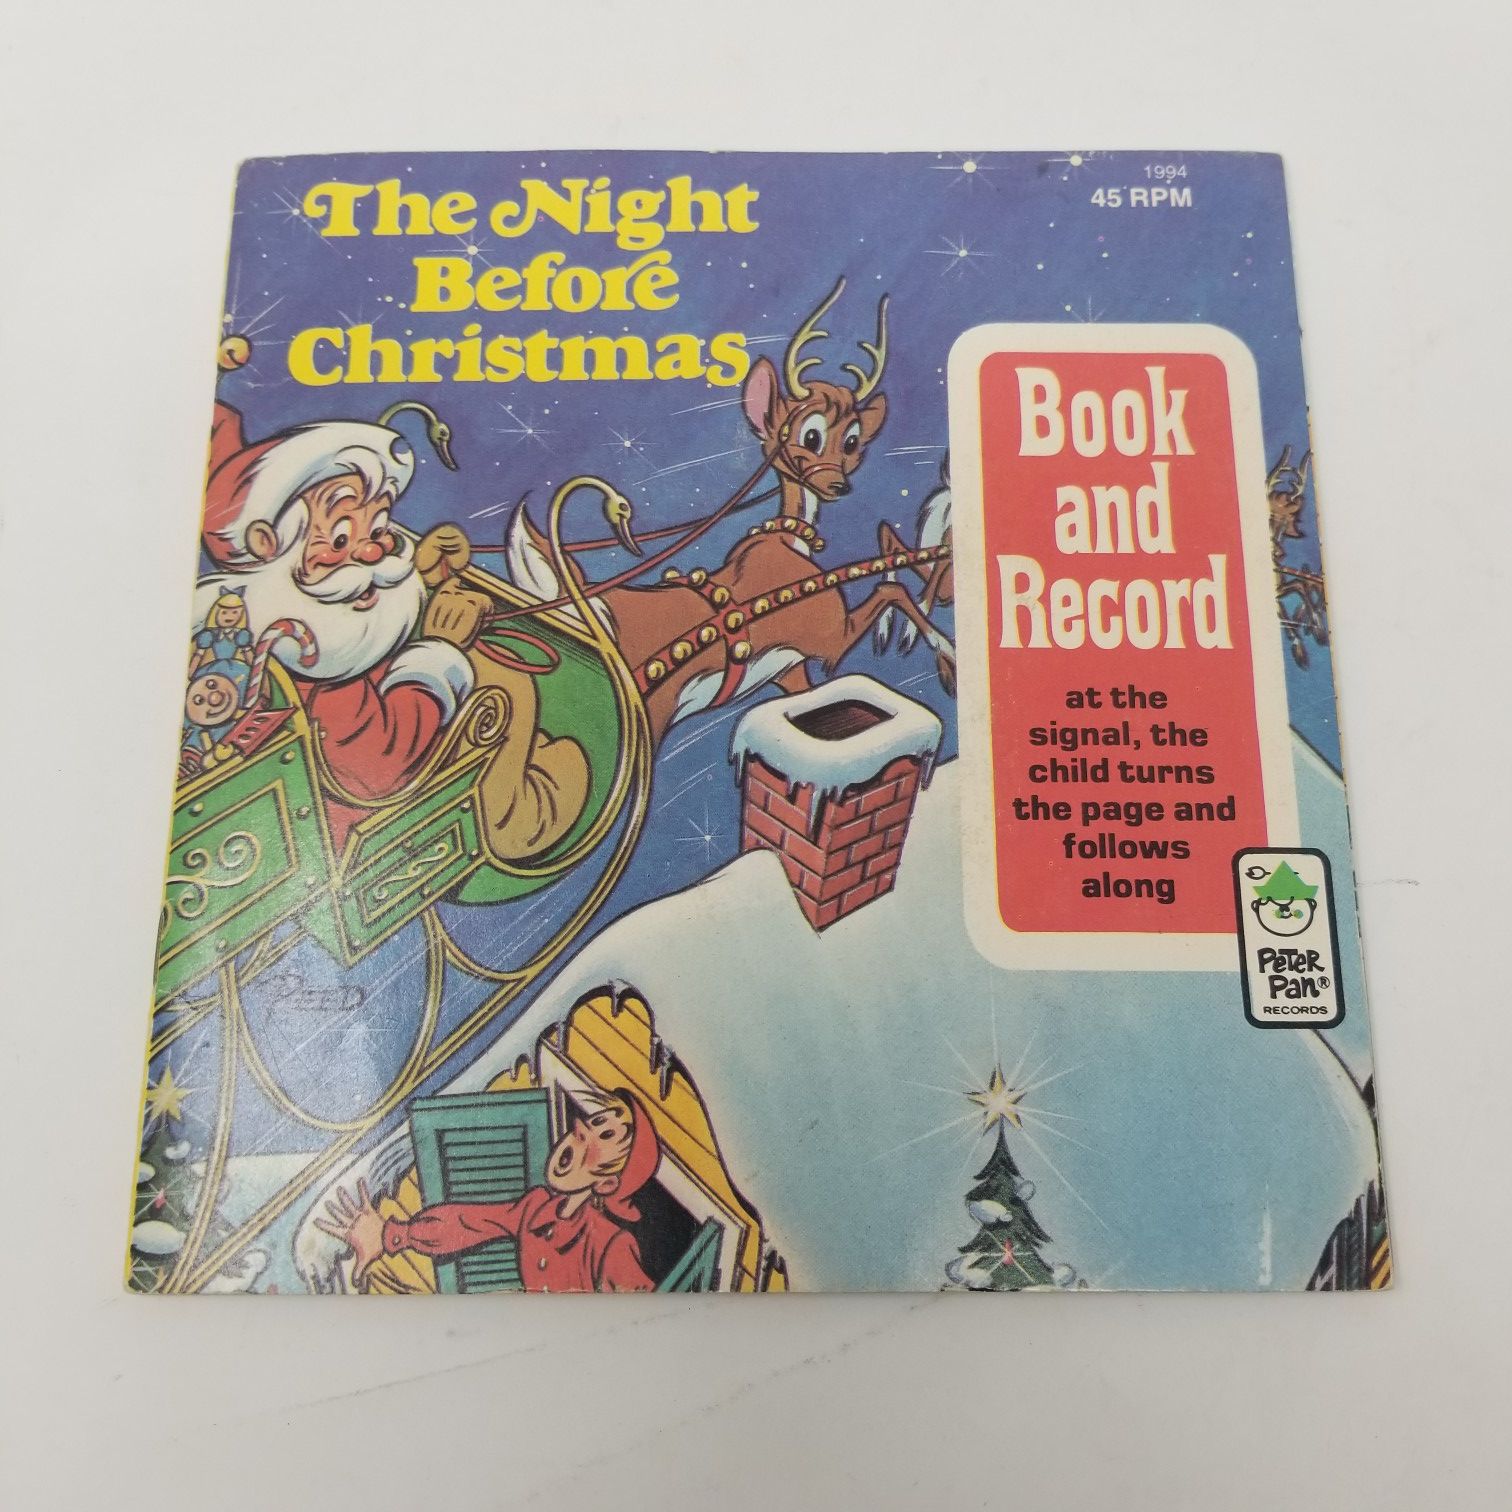 Peter Pan Record The Night Before Christmas Book & Record 45rpm 1977